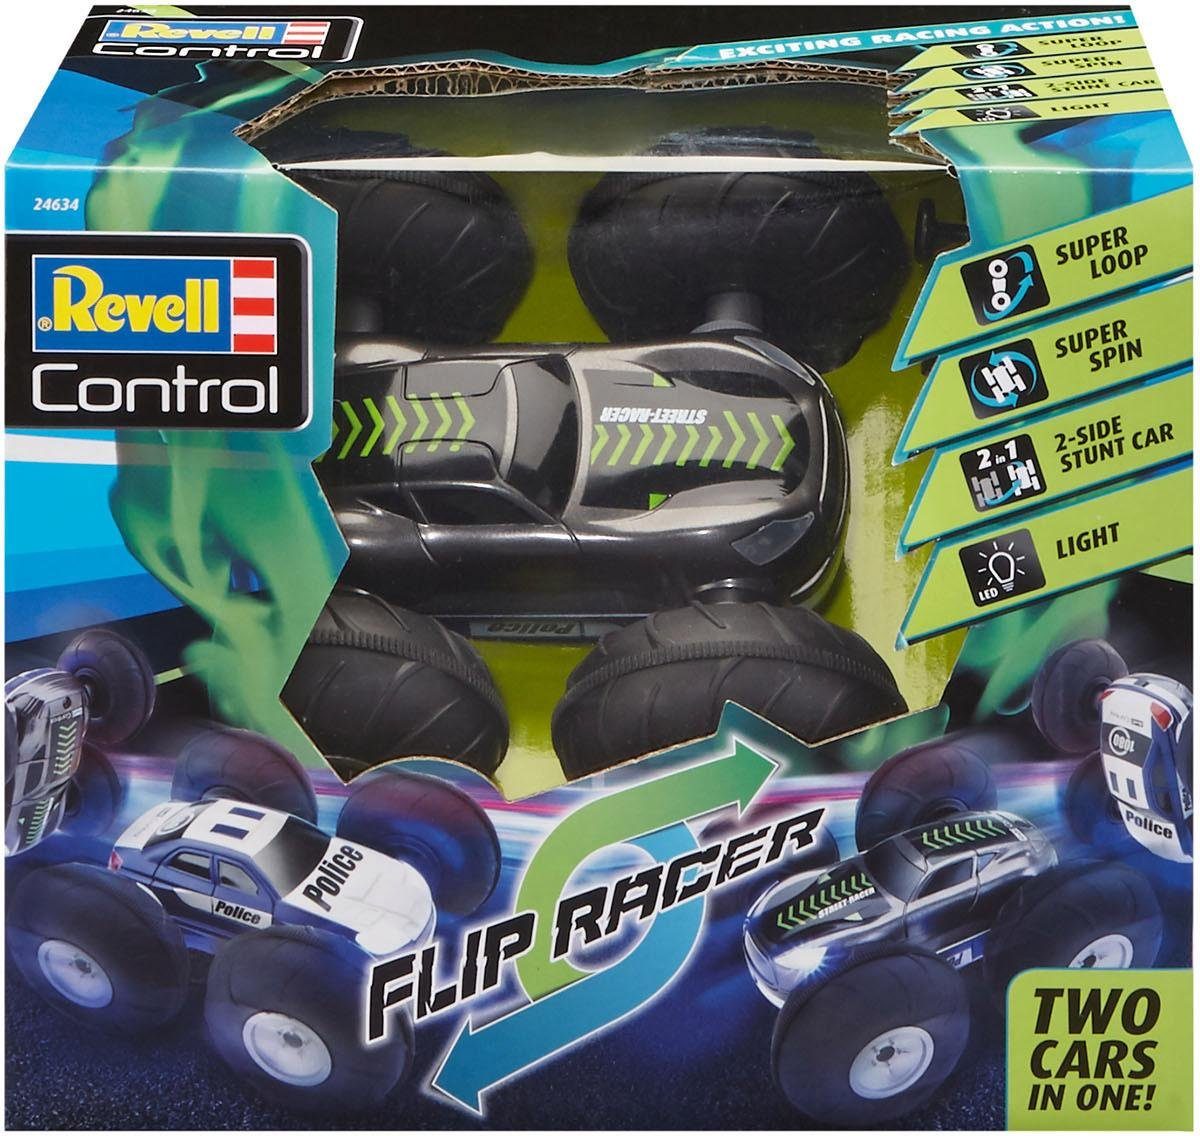 Car Revell® LED-Beleuchtung Racer, Stunt control, RC-Auto Flip Revell® mit